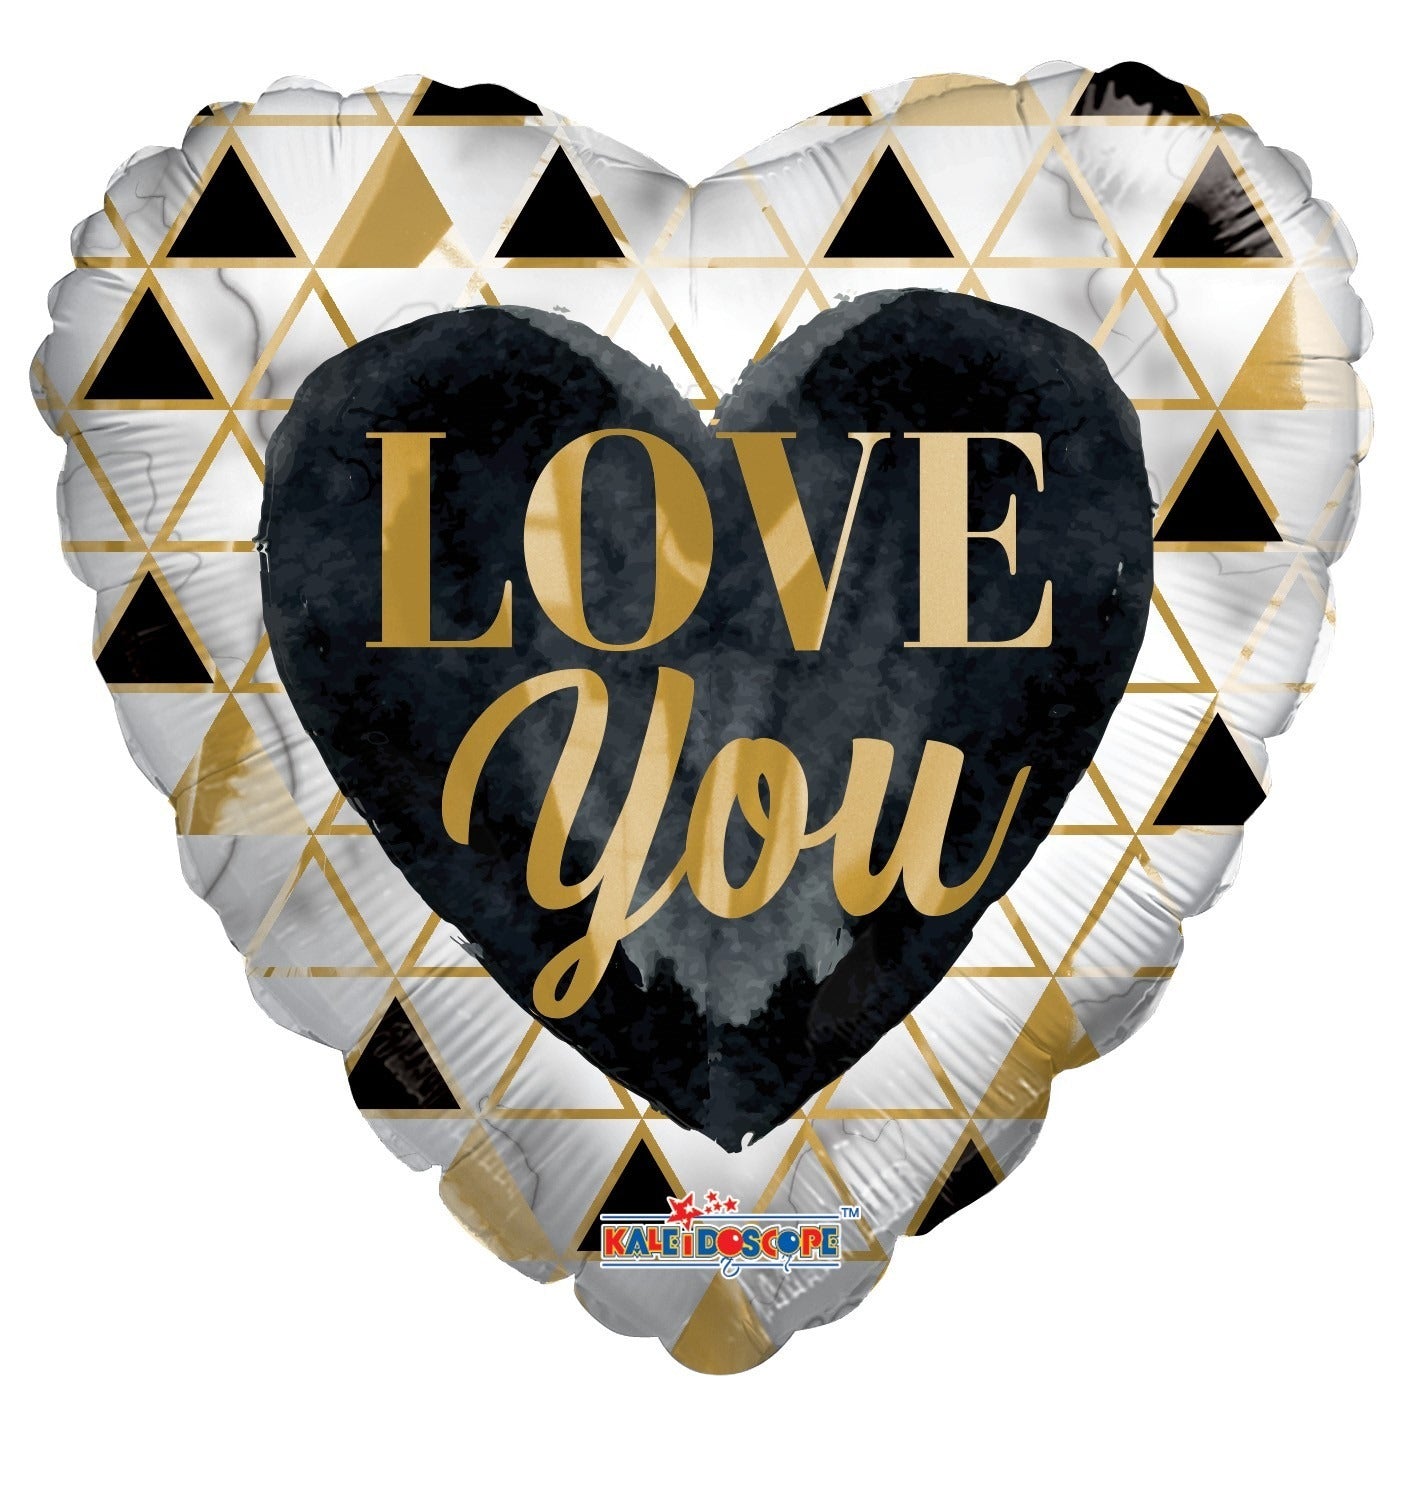 View 18 Inch Love You Eco Balloon black and gold information